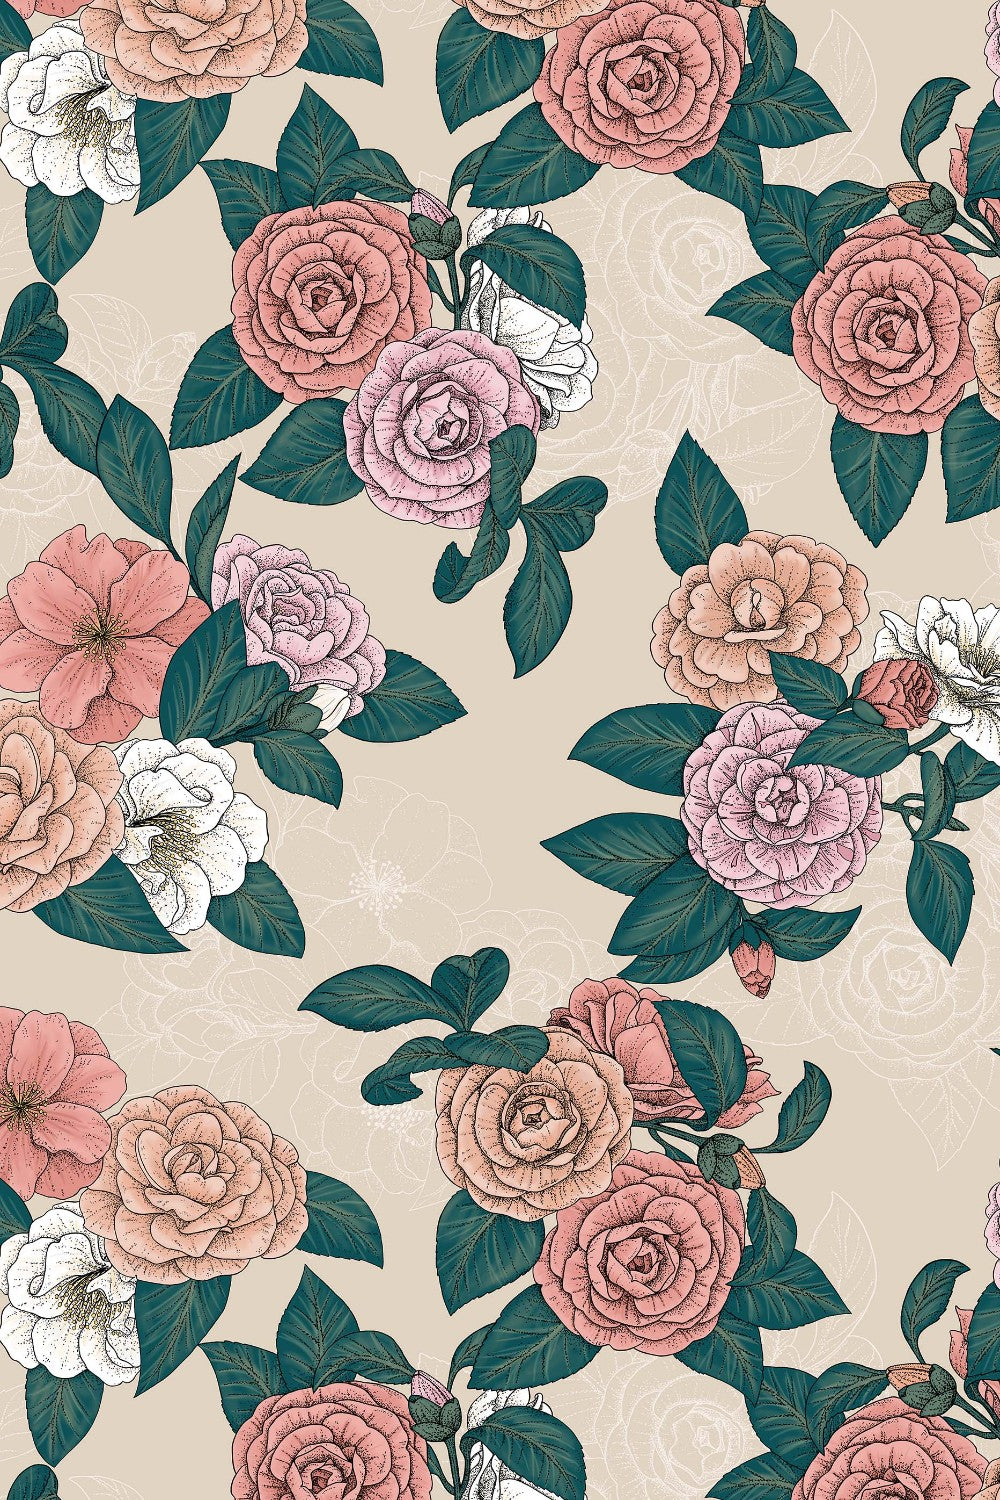 Eco-Friendly Illustrated Floral Wallpaper